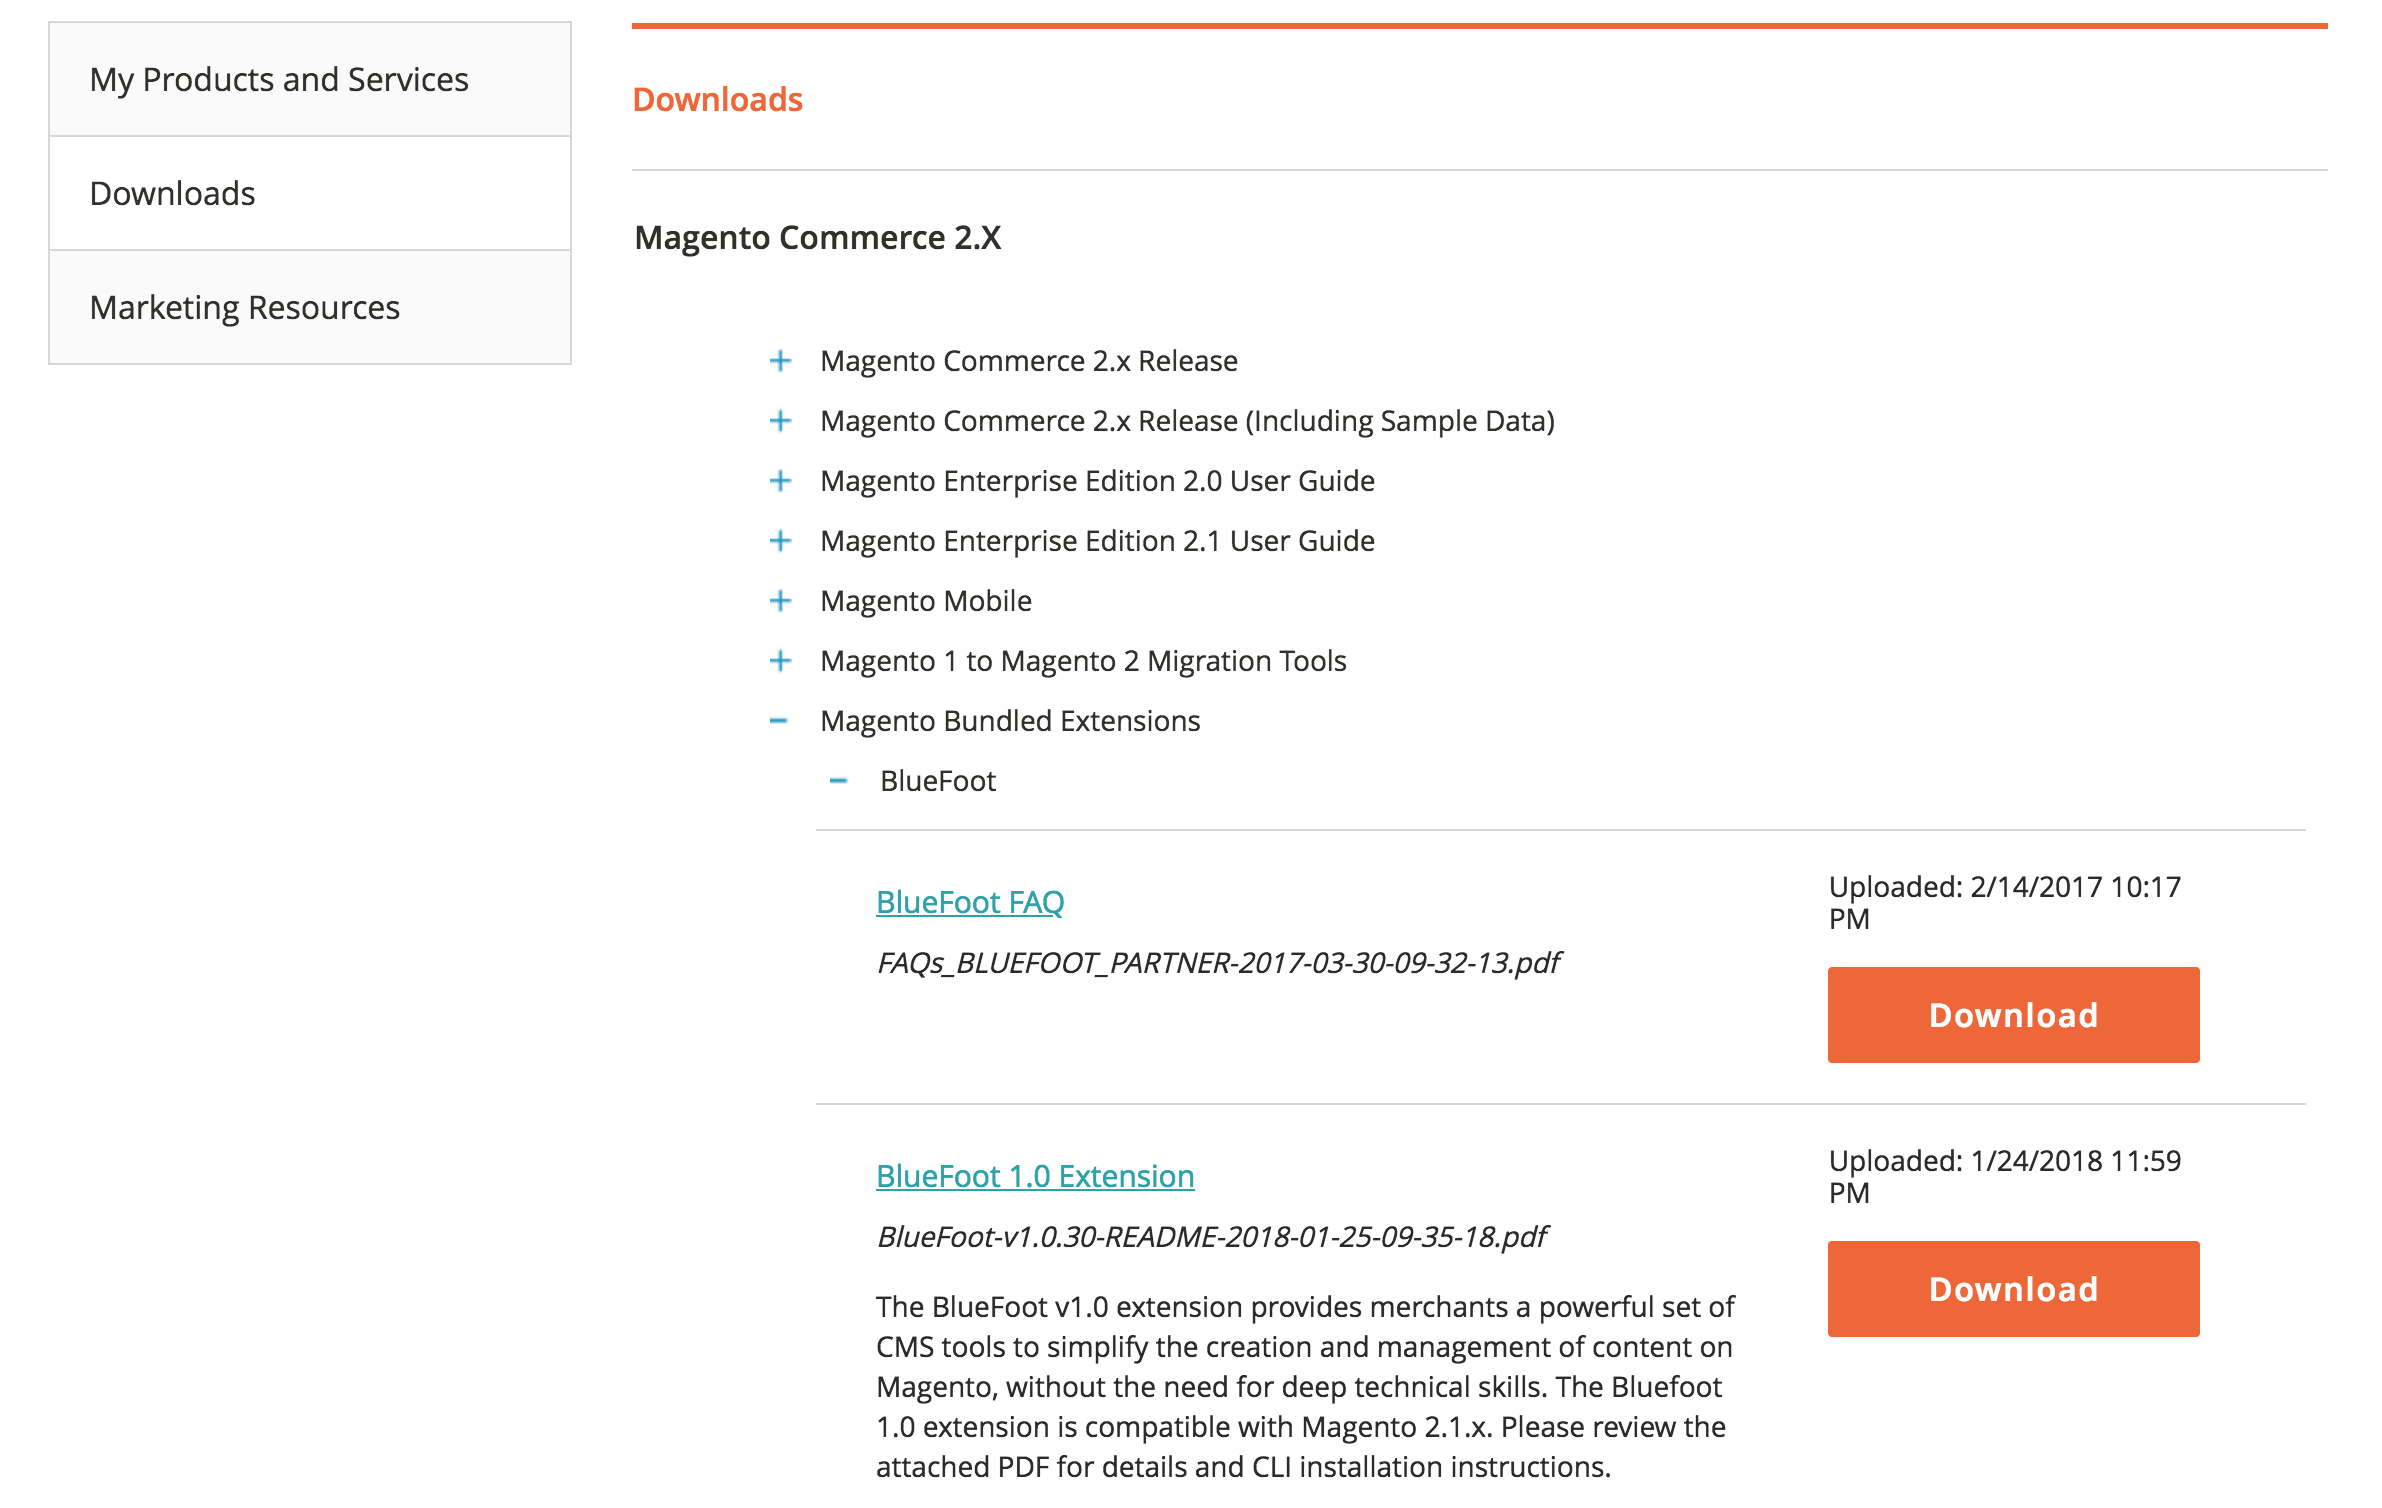 Where To Download Bluefoot Extension For Magento 2 Magento Forums